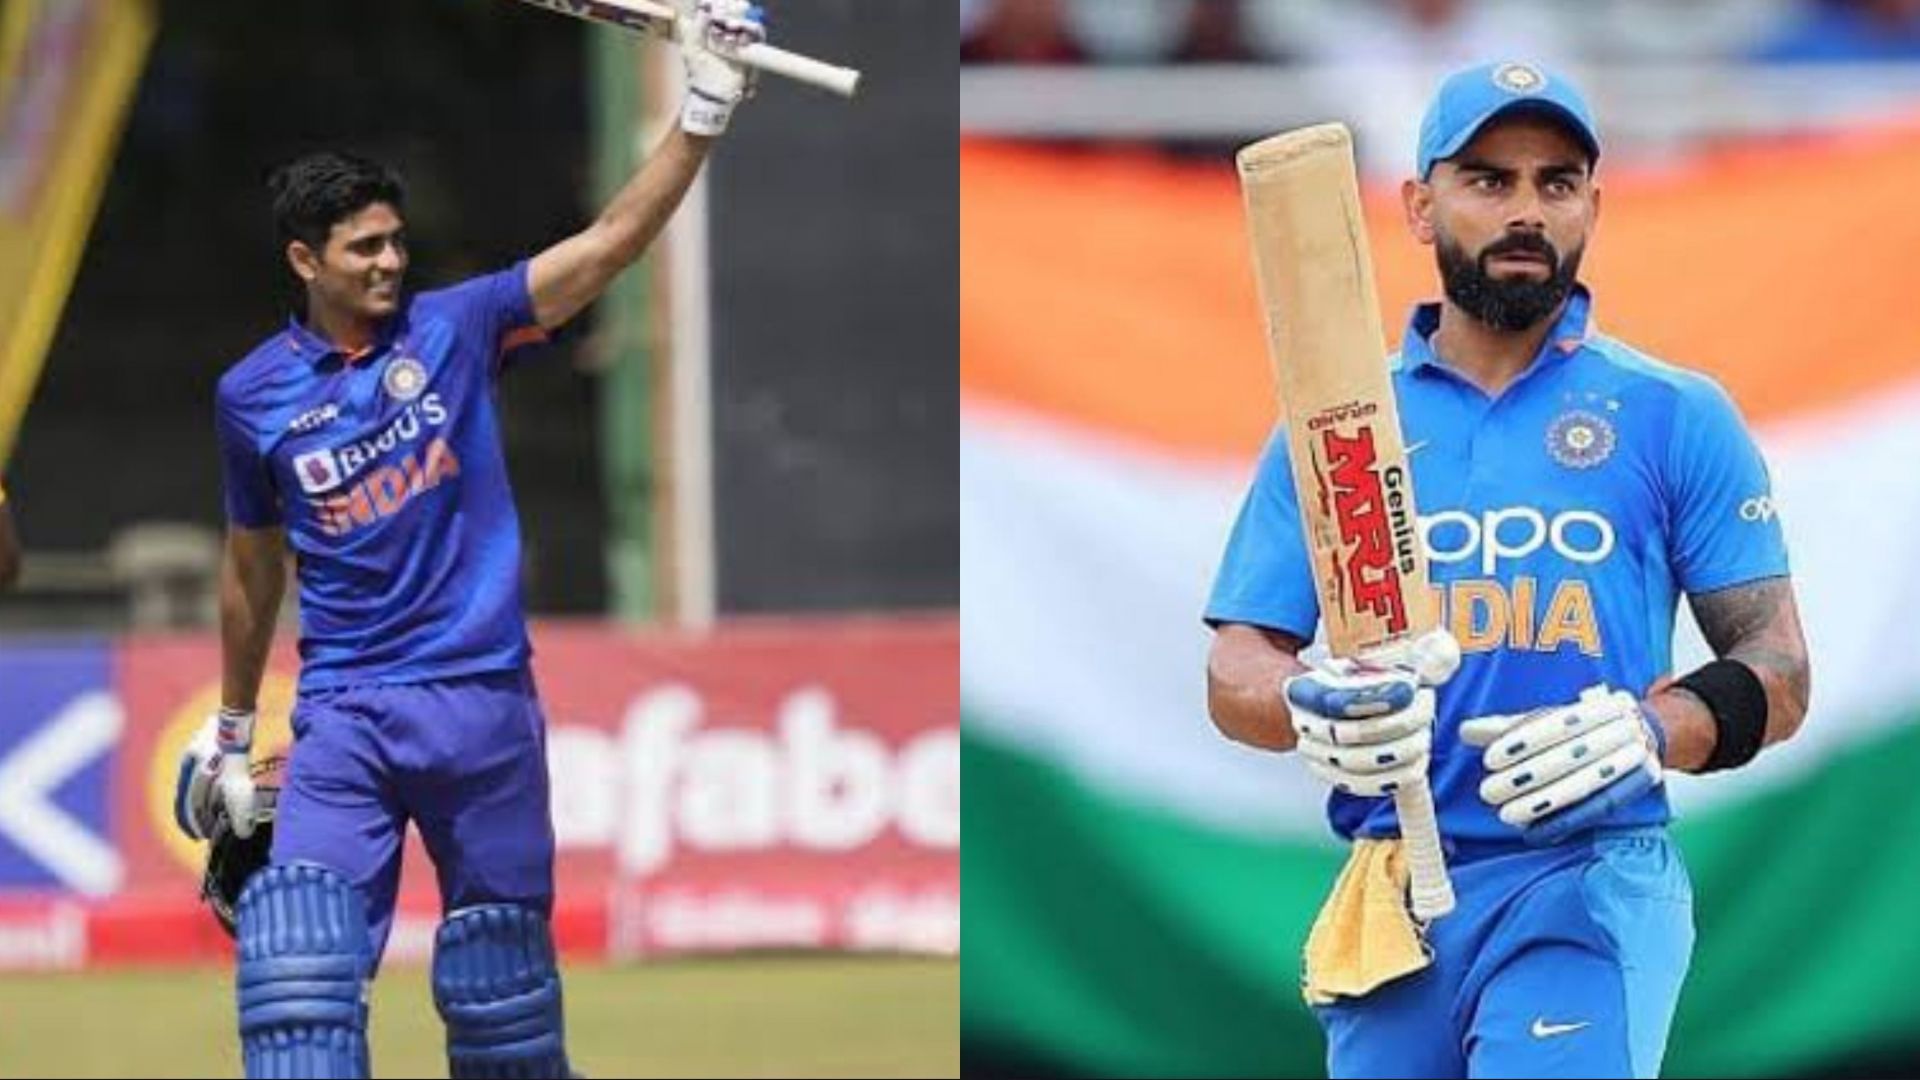 Shubman Gill and Virat Kohli feature on this iconic list